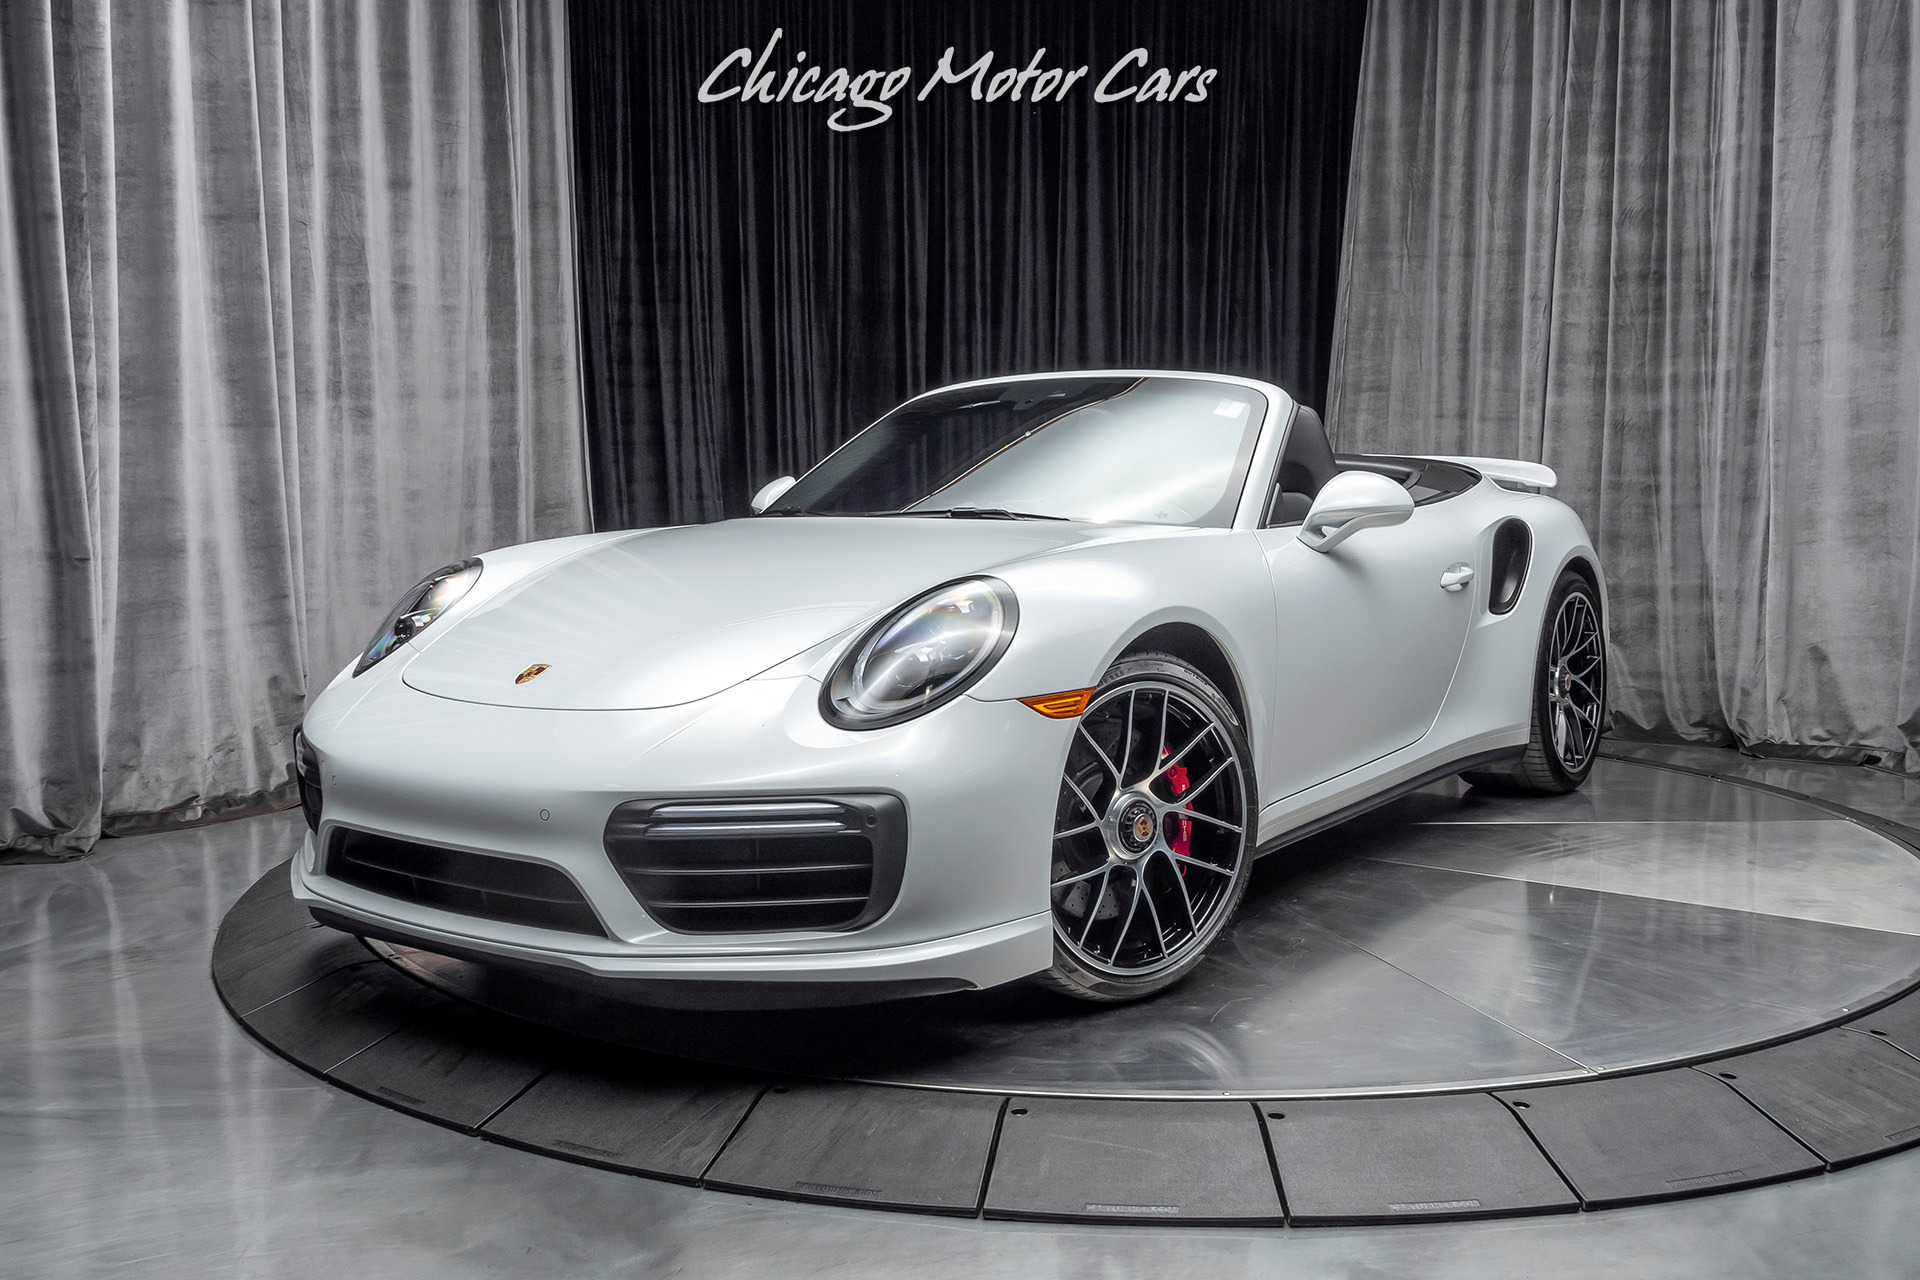 Used-2019-Porsche-911-Turbo-Cabriolet-MSRP-200k-LOADED-wFACTORY-OPTIONs-ONLY-7k-Miles